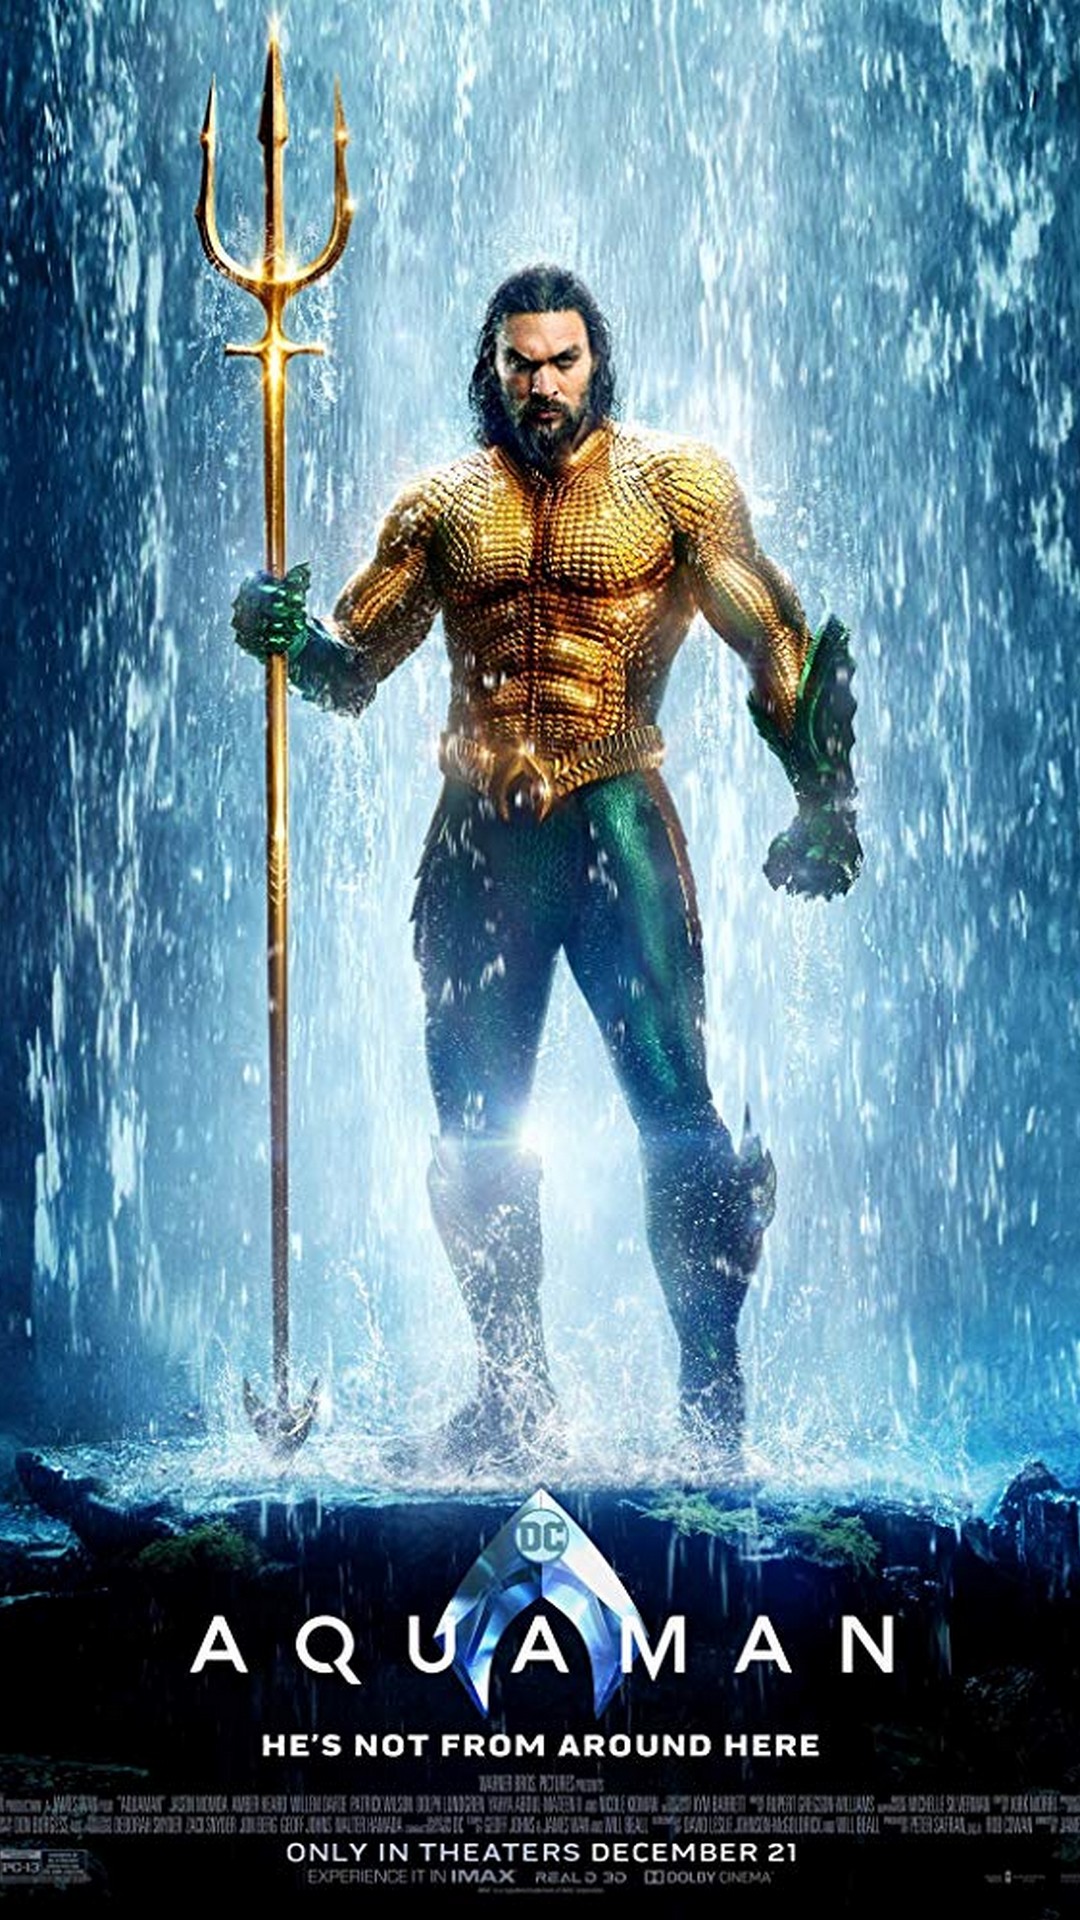 Android Wallpaper Aquaman with image resolution 1080x1920 pixel. You can make this wallpaper for your Android backgrounds, Tablet, Smartphones Screensavers and Mobile Phone Lock Screen